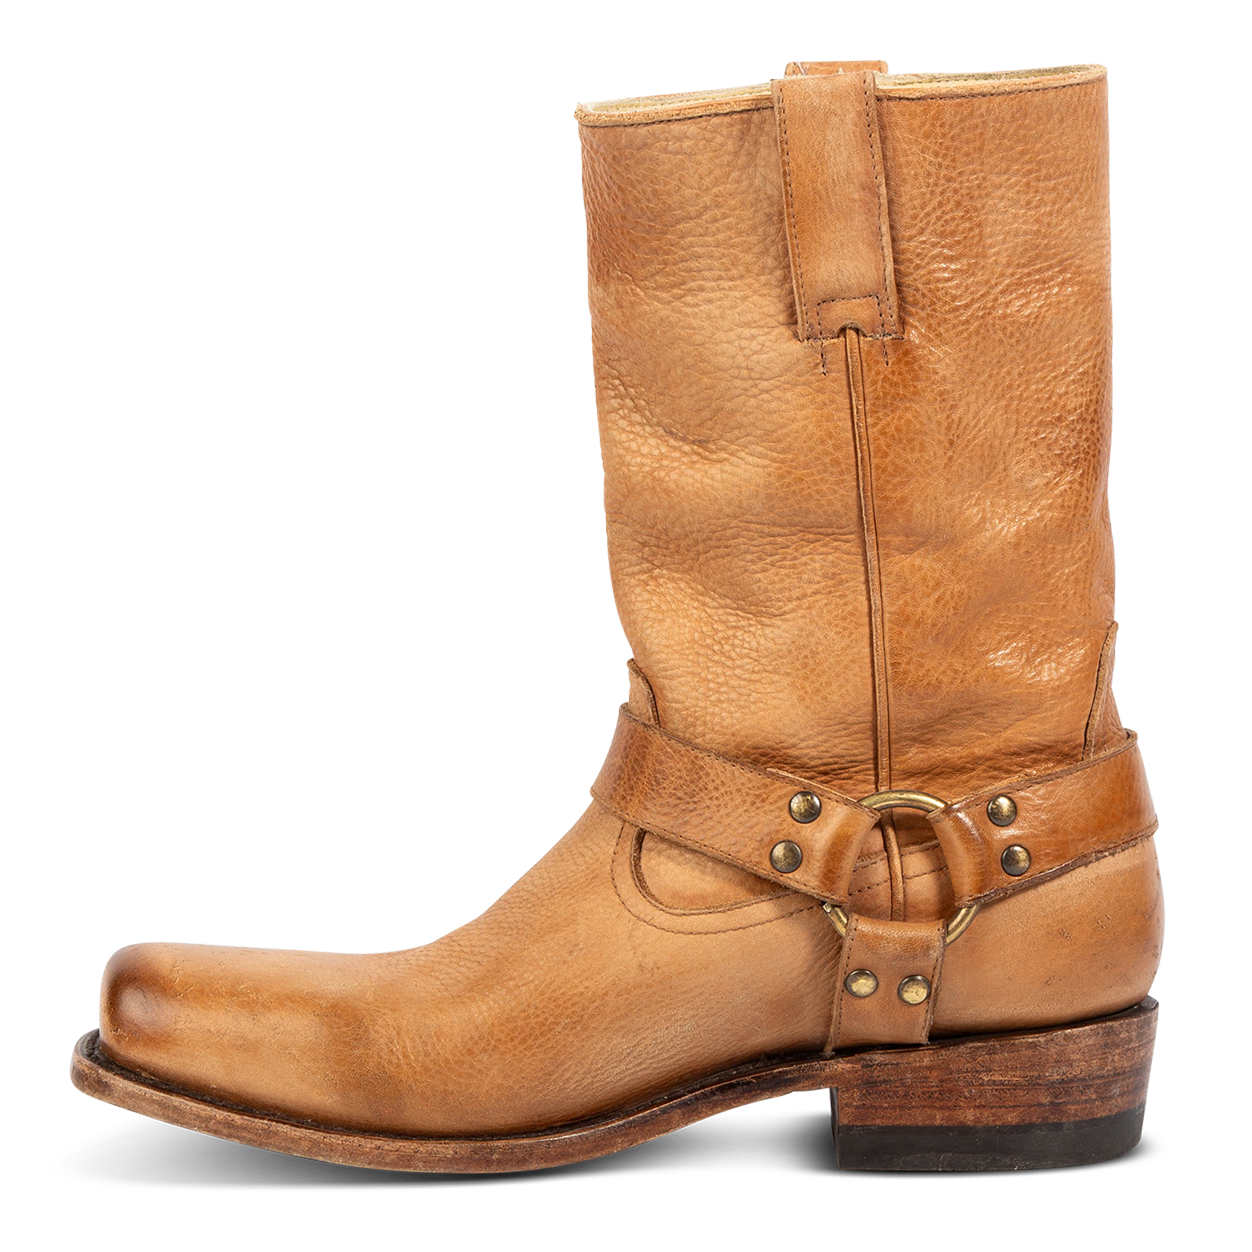 Inside view showing leather ankle harness with brass hardware on FREEBIRD men's Copperhead banana boot